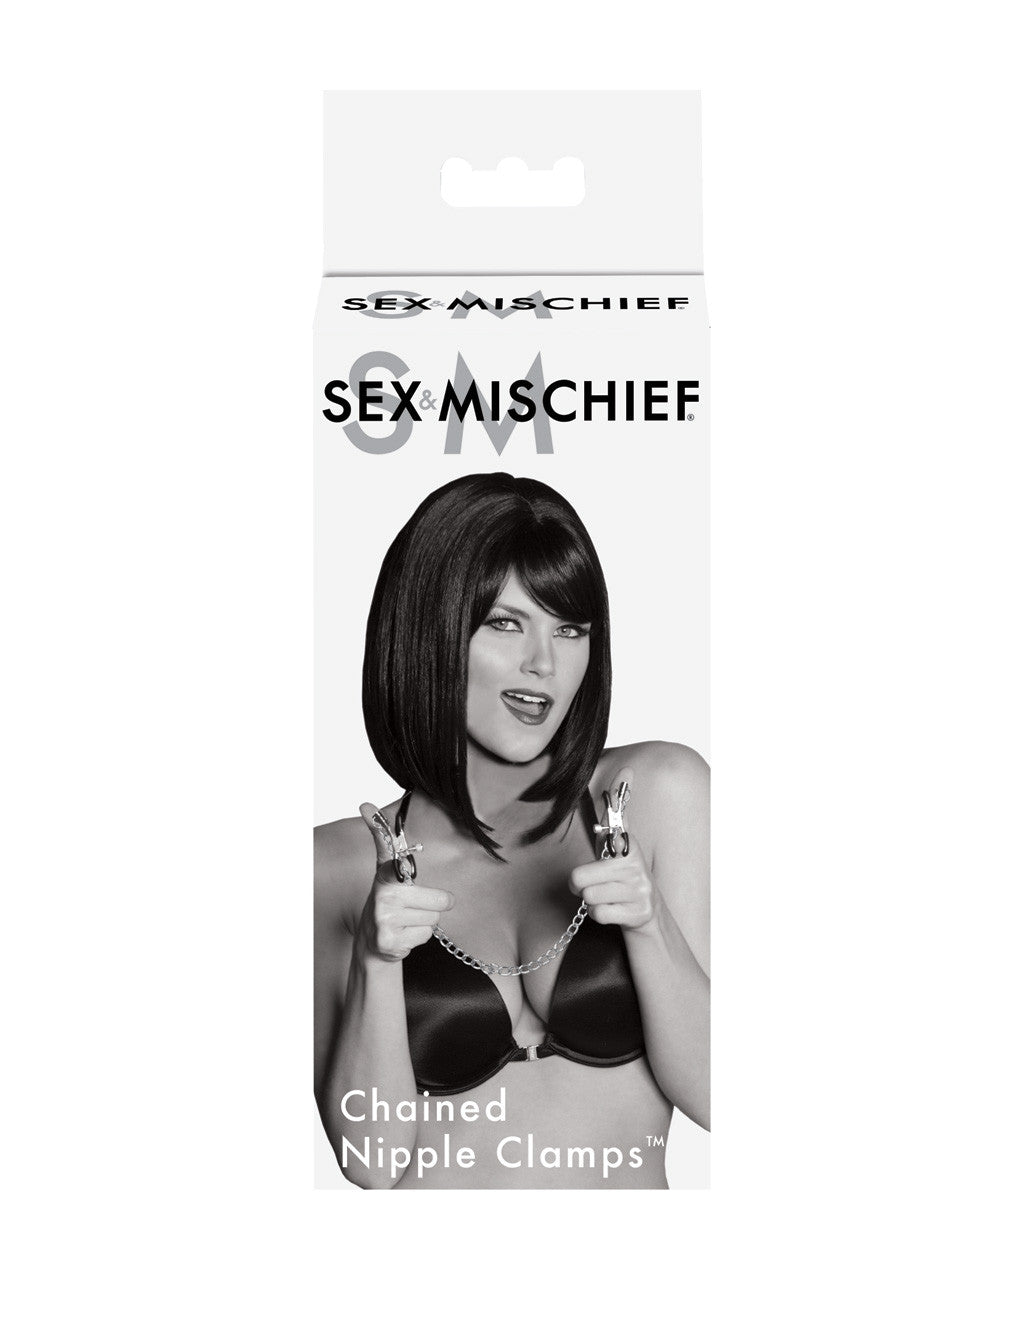 Sex & Mischief by Sportsheets Chained Nipple Clamps Package